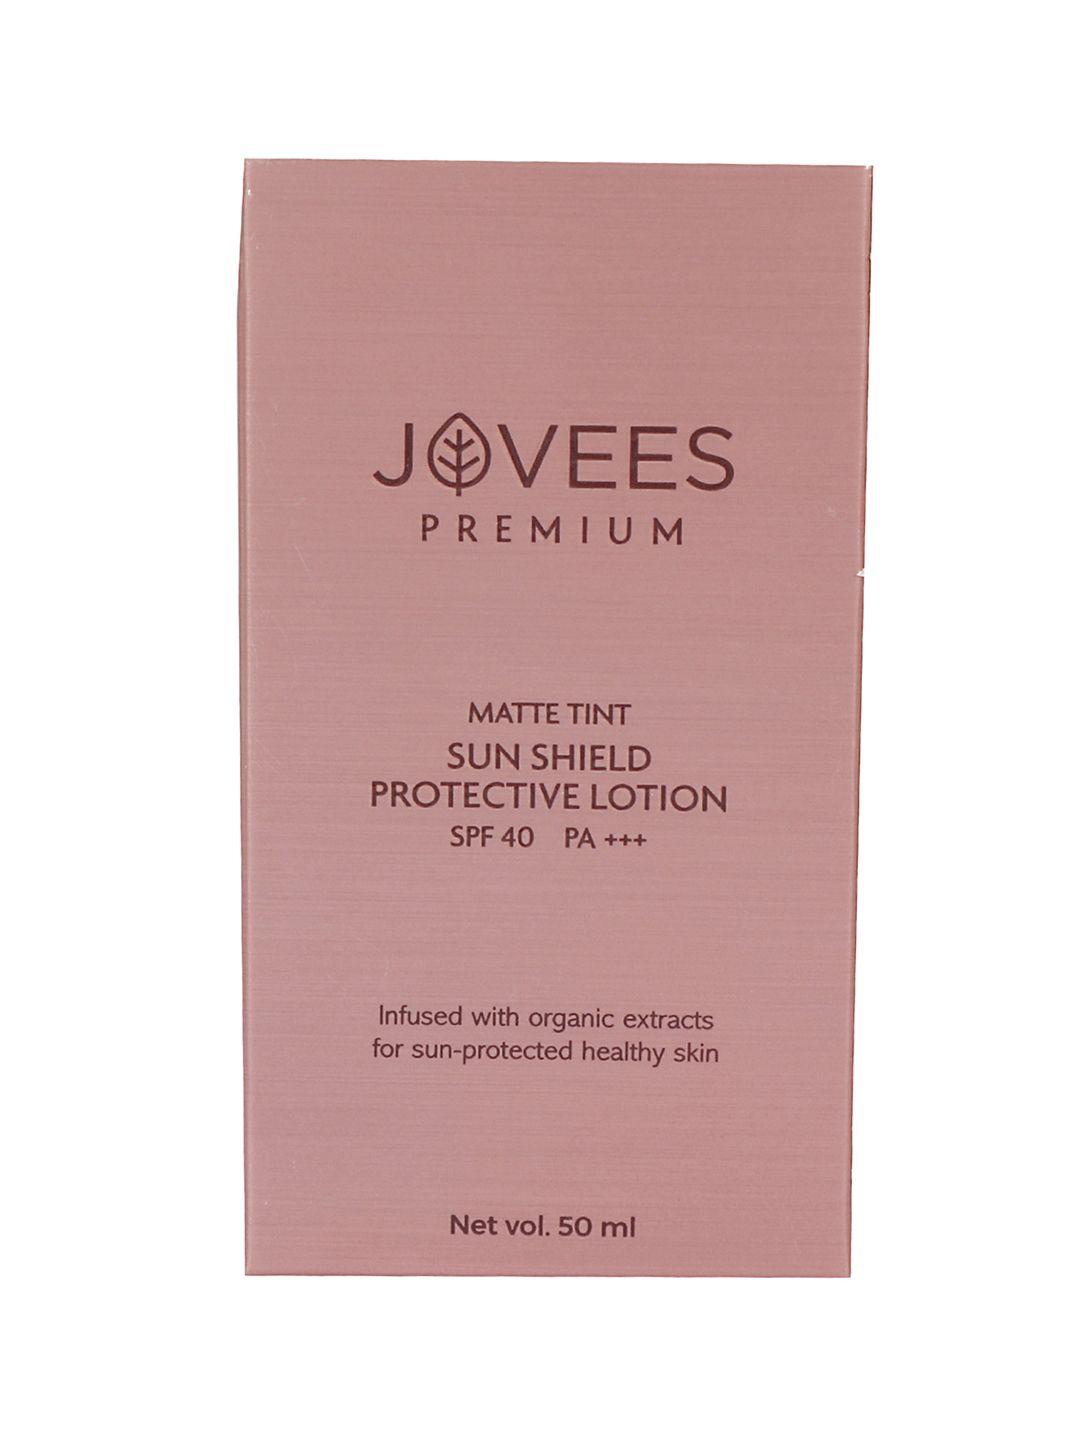 jovees-sun-shield-matte-tint-protective-lotion-with-spf-40-pa+++---50-ml